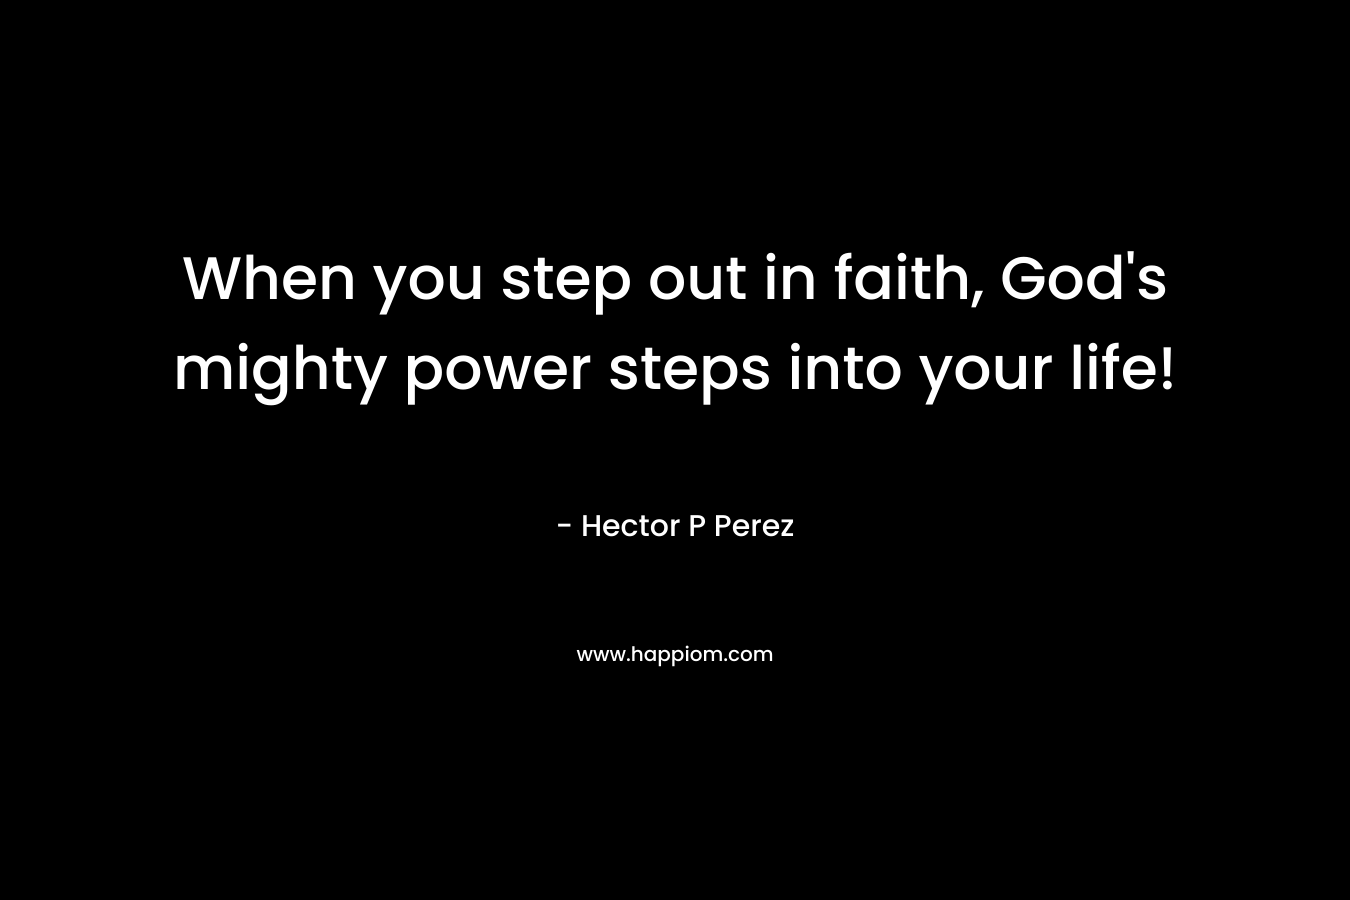 When you step out in faith, God’s mighty power steps into your life! – Hector P Perez